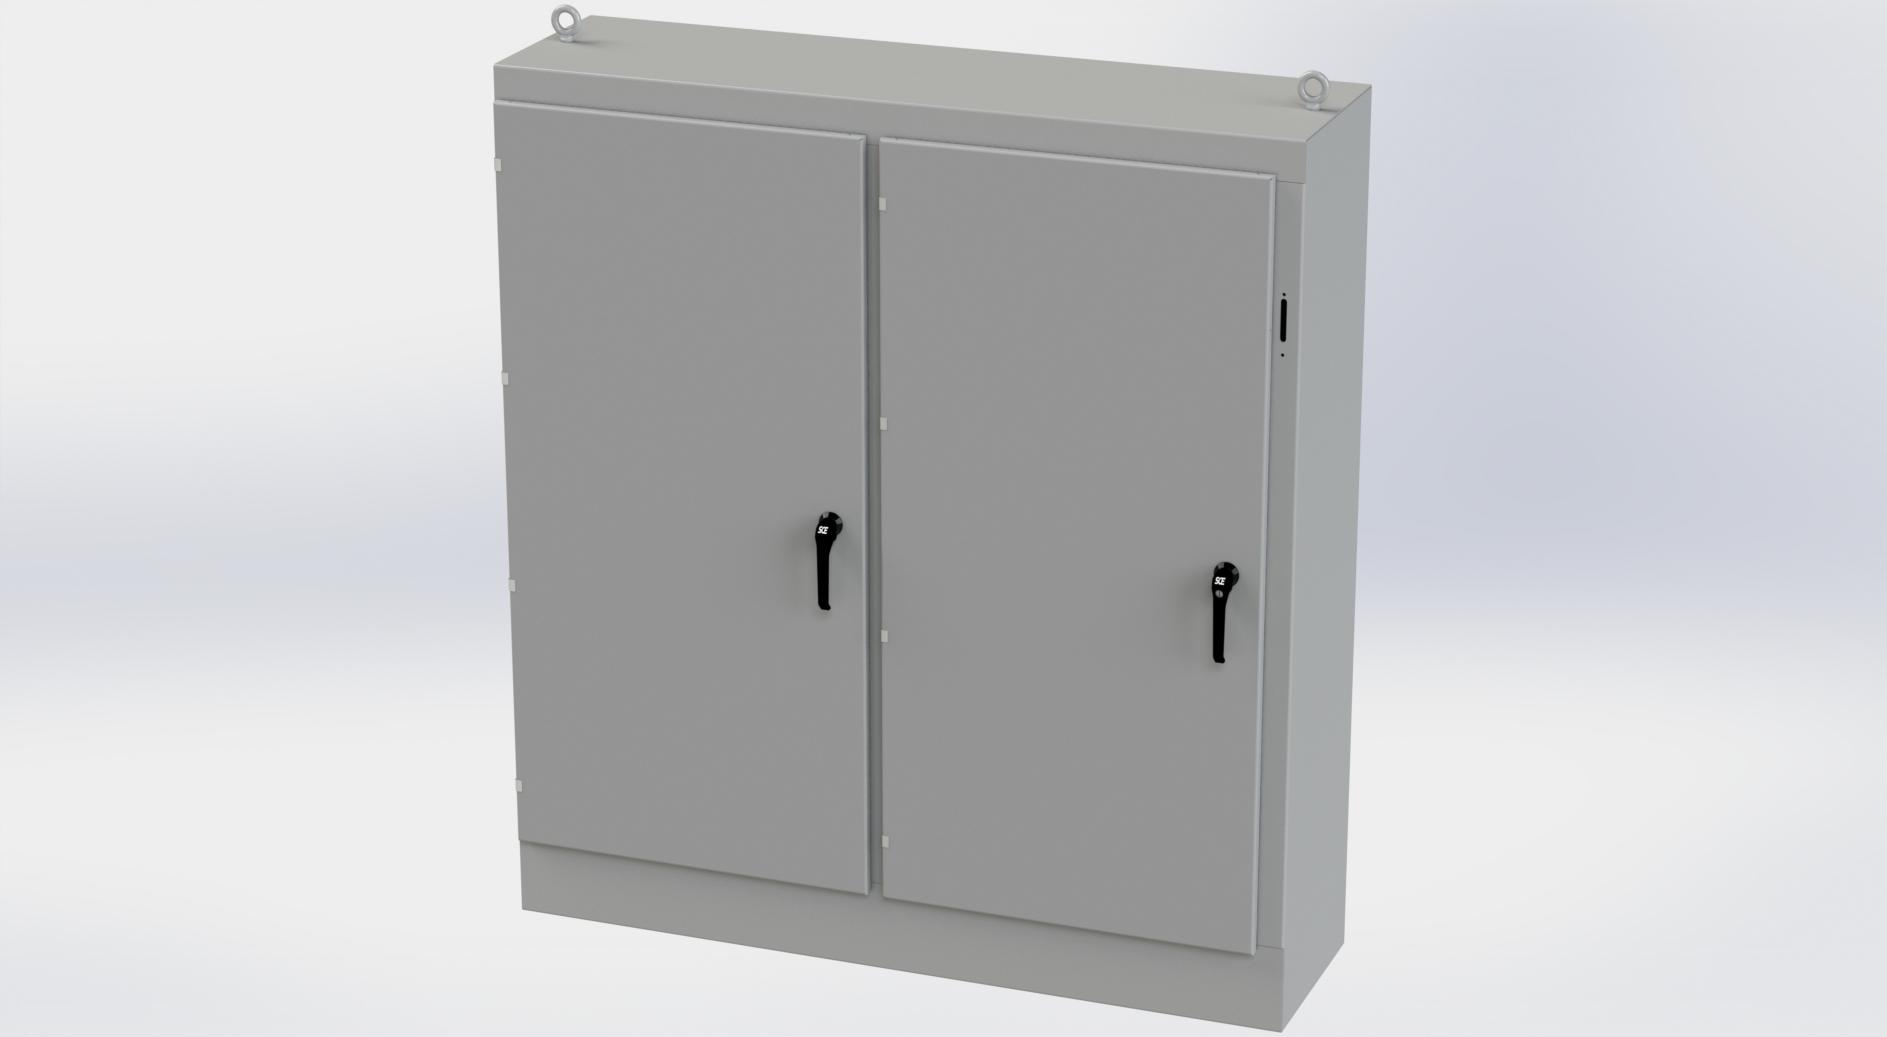 Saginaw Control SCE-72XM6618 2DR XM Enclosure, Height:72.00", Width:65.75", Depth:18.00", ANSI-61 gray powder coating inside and out. Sub-panels are powder coated white.